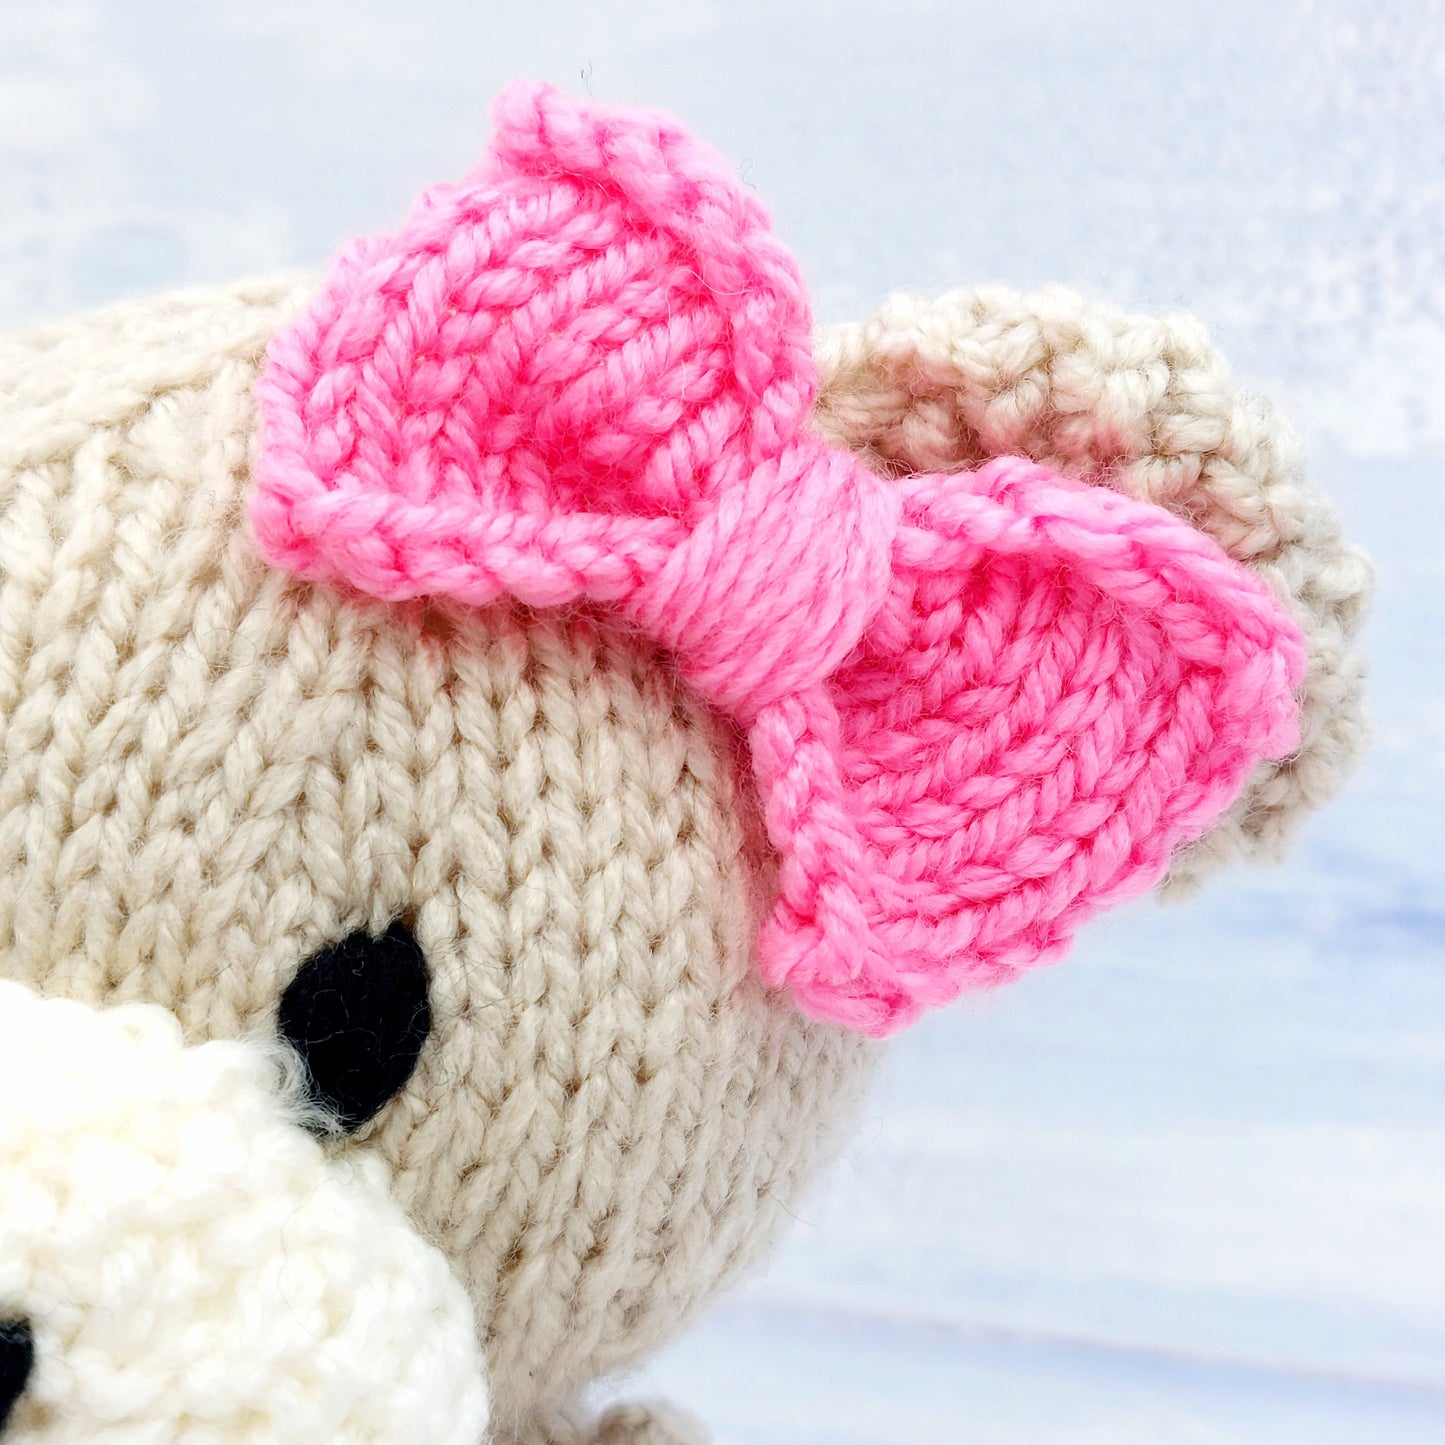 Knitted Tommy & Tilly the Bears - PDF Knitting Pattern